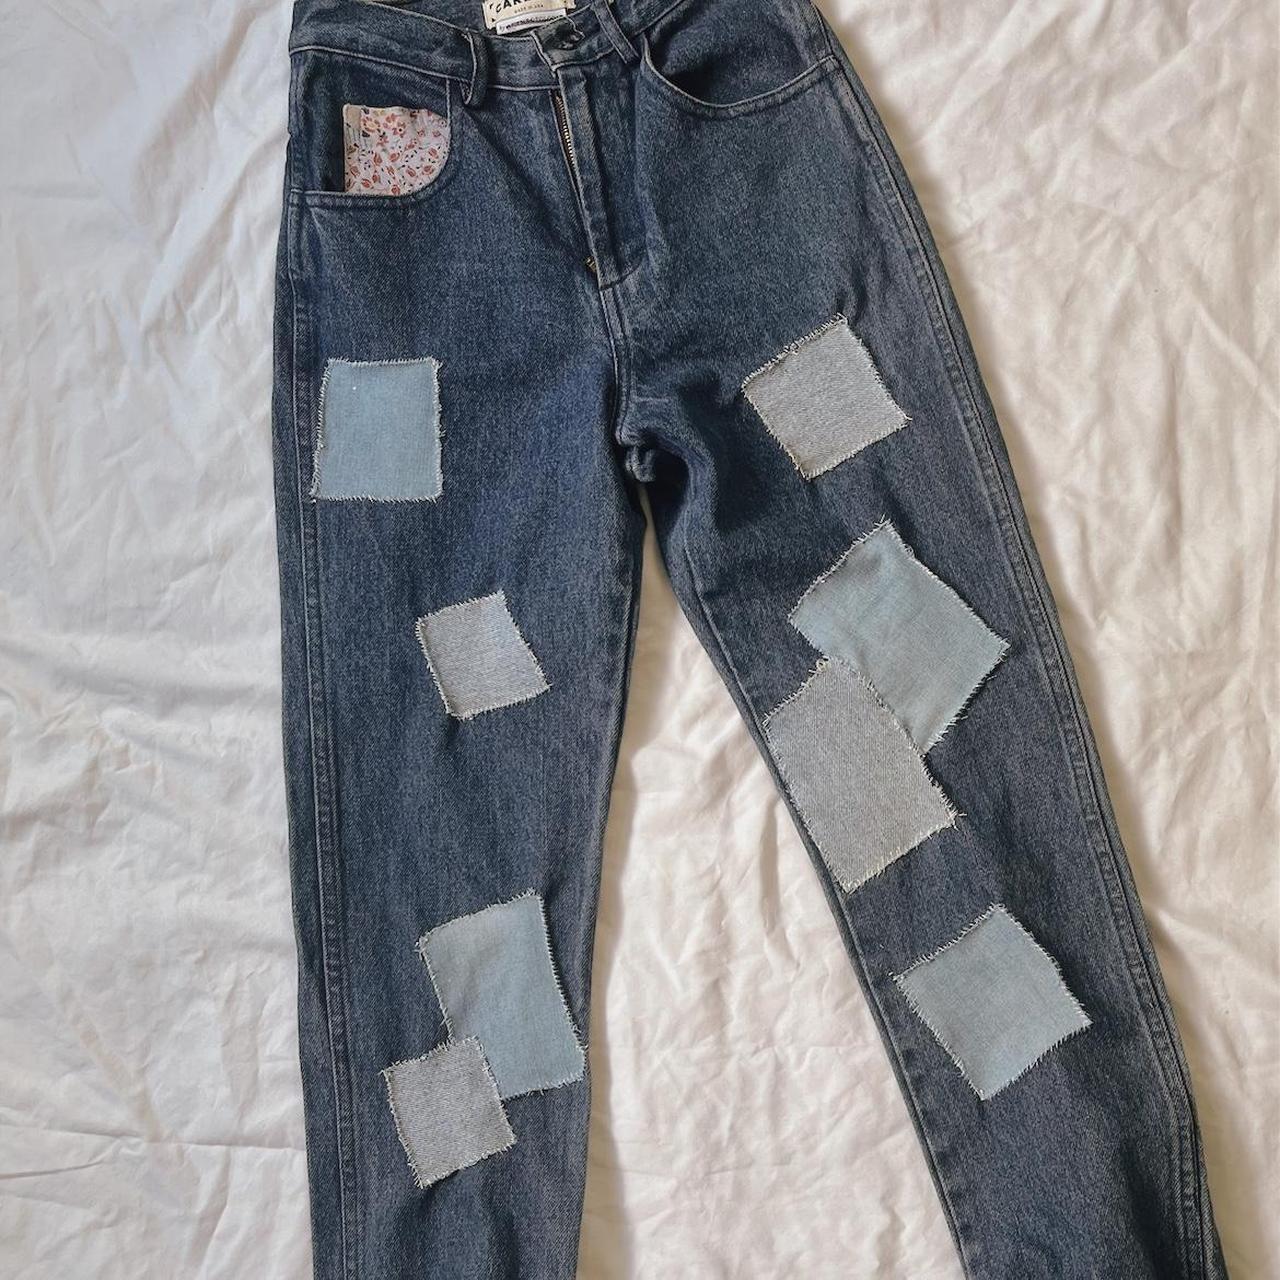 Anthropologie, Jeans